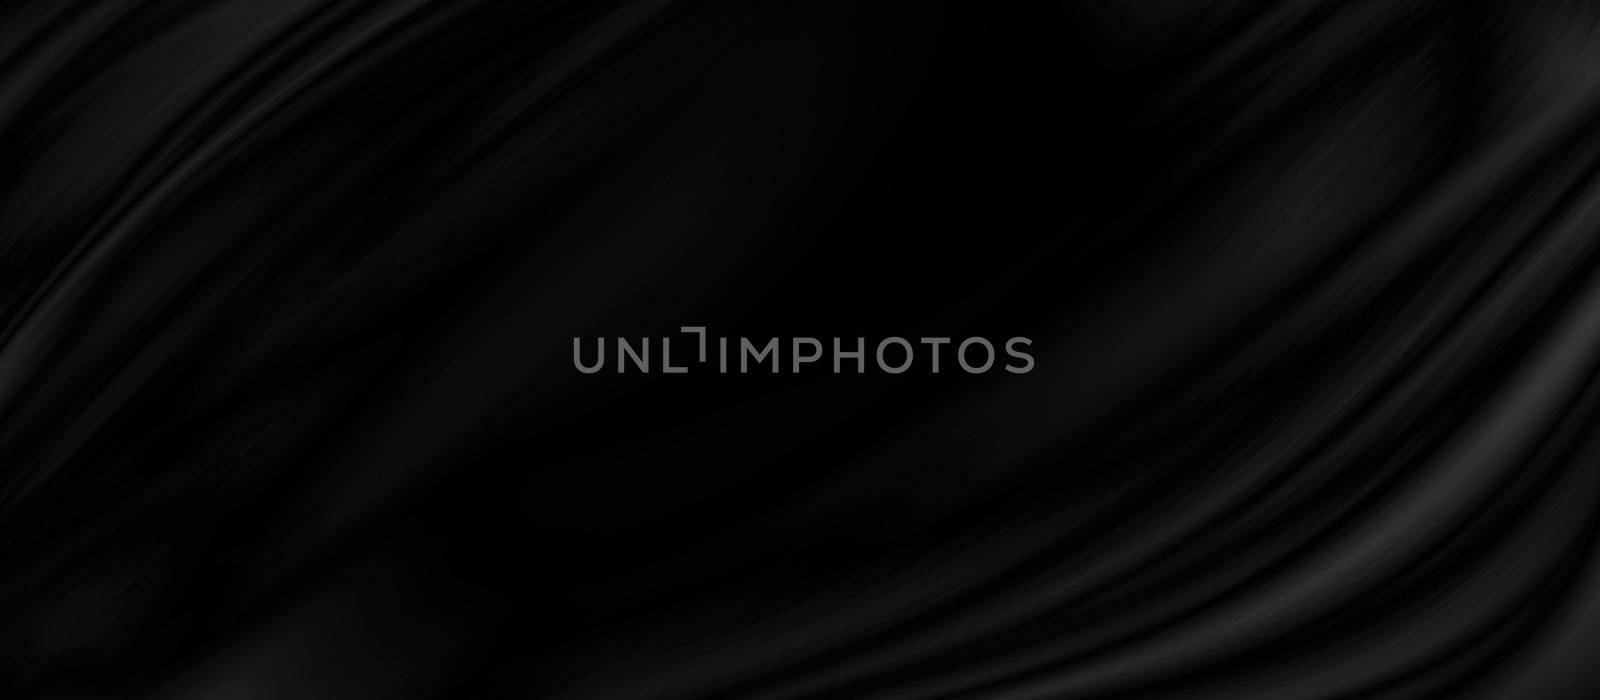 Black fabric texture background illustration by Myimagine